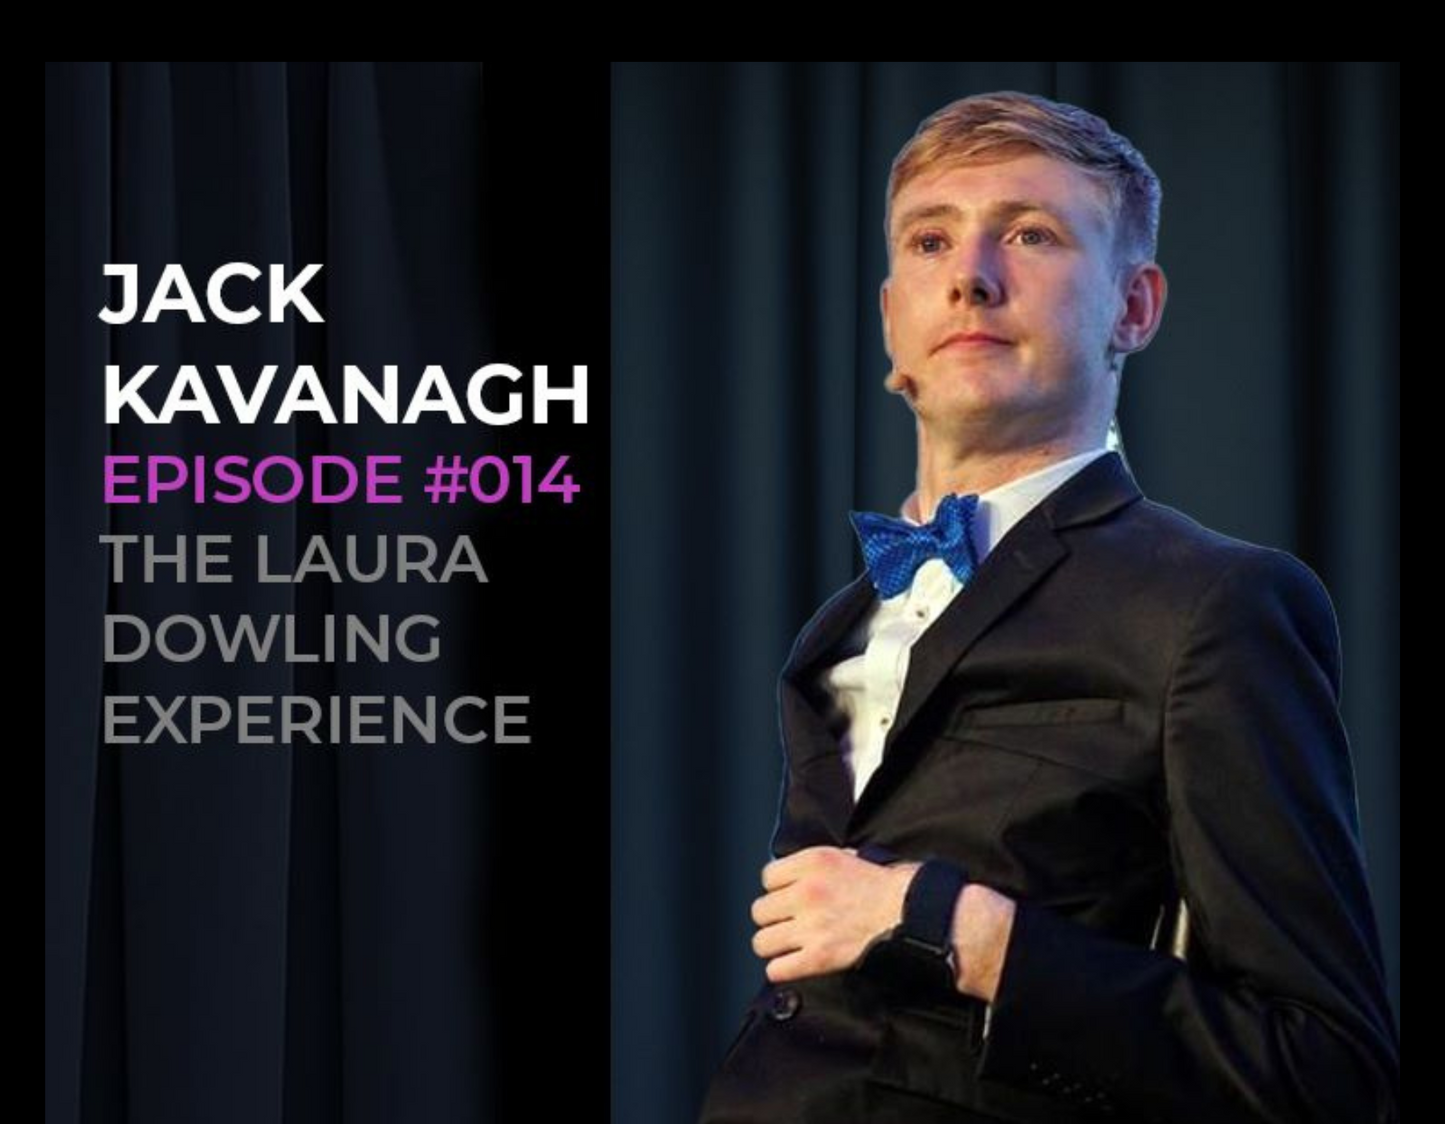 Exploration of life and diversity with Jack Kavanagh. Episode #014